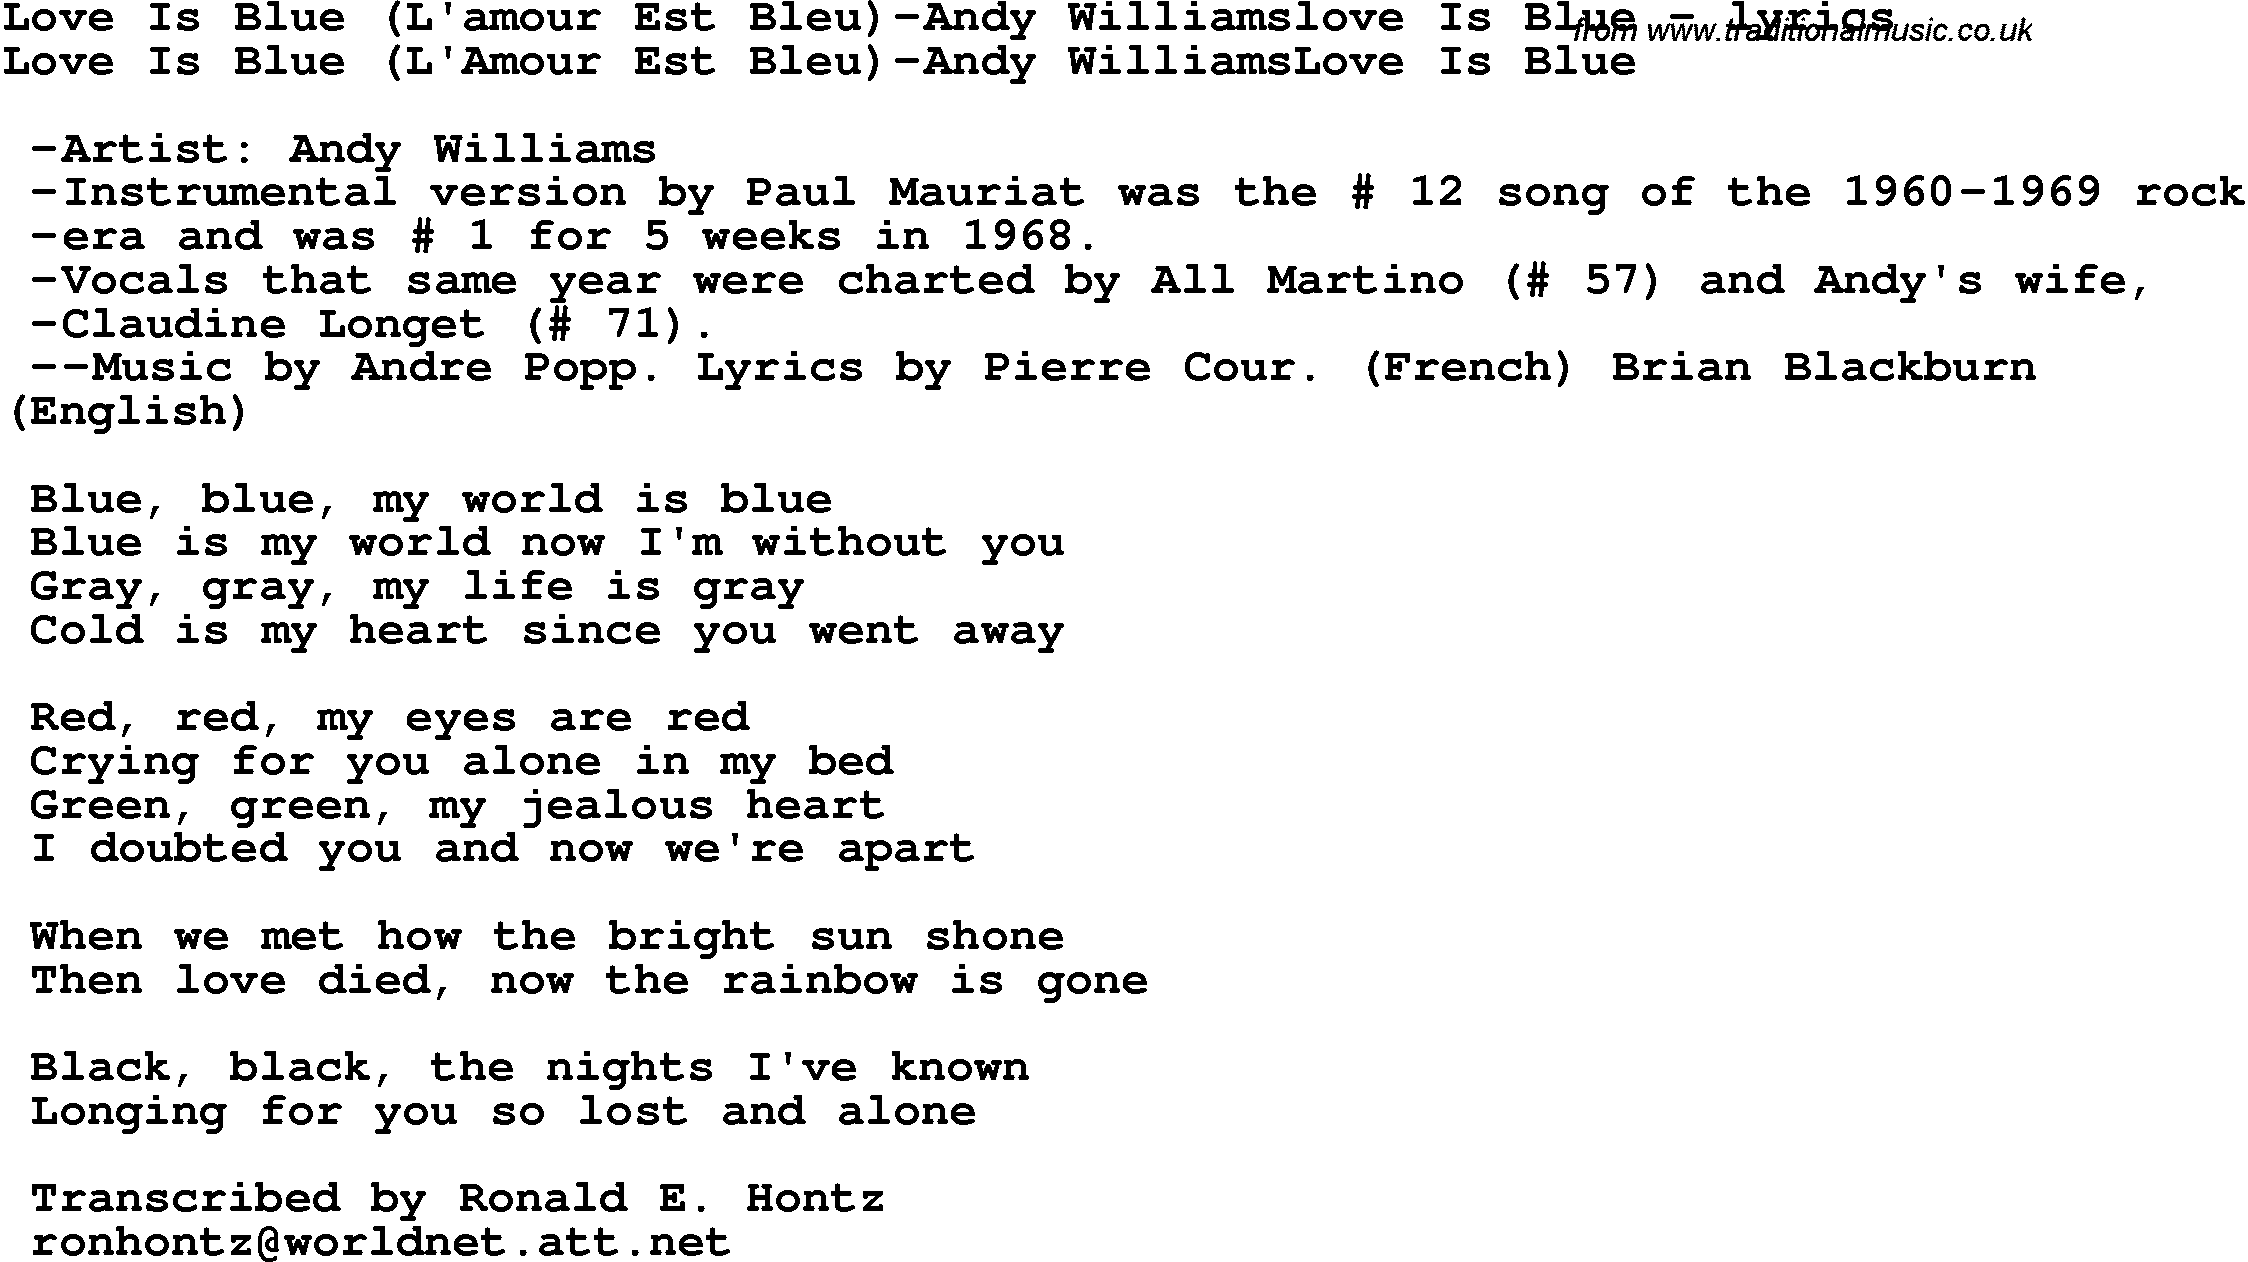 Love Song Lyrics for: Love Is Blue (L'amour Est Bleu)-Andy Williamslove Is Blue